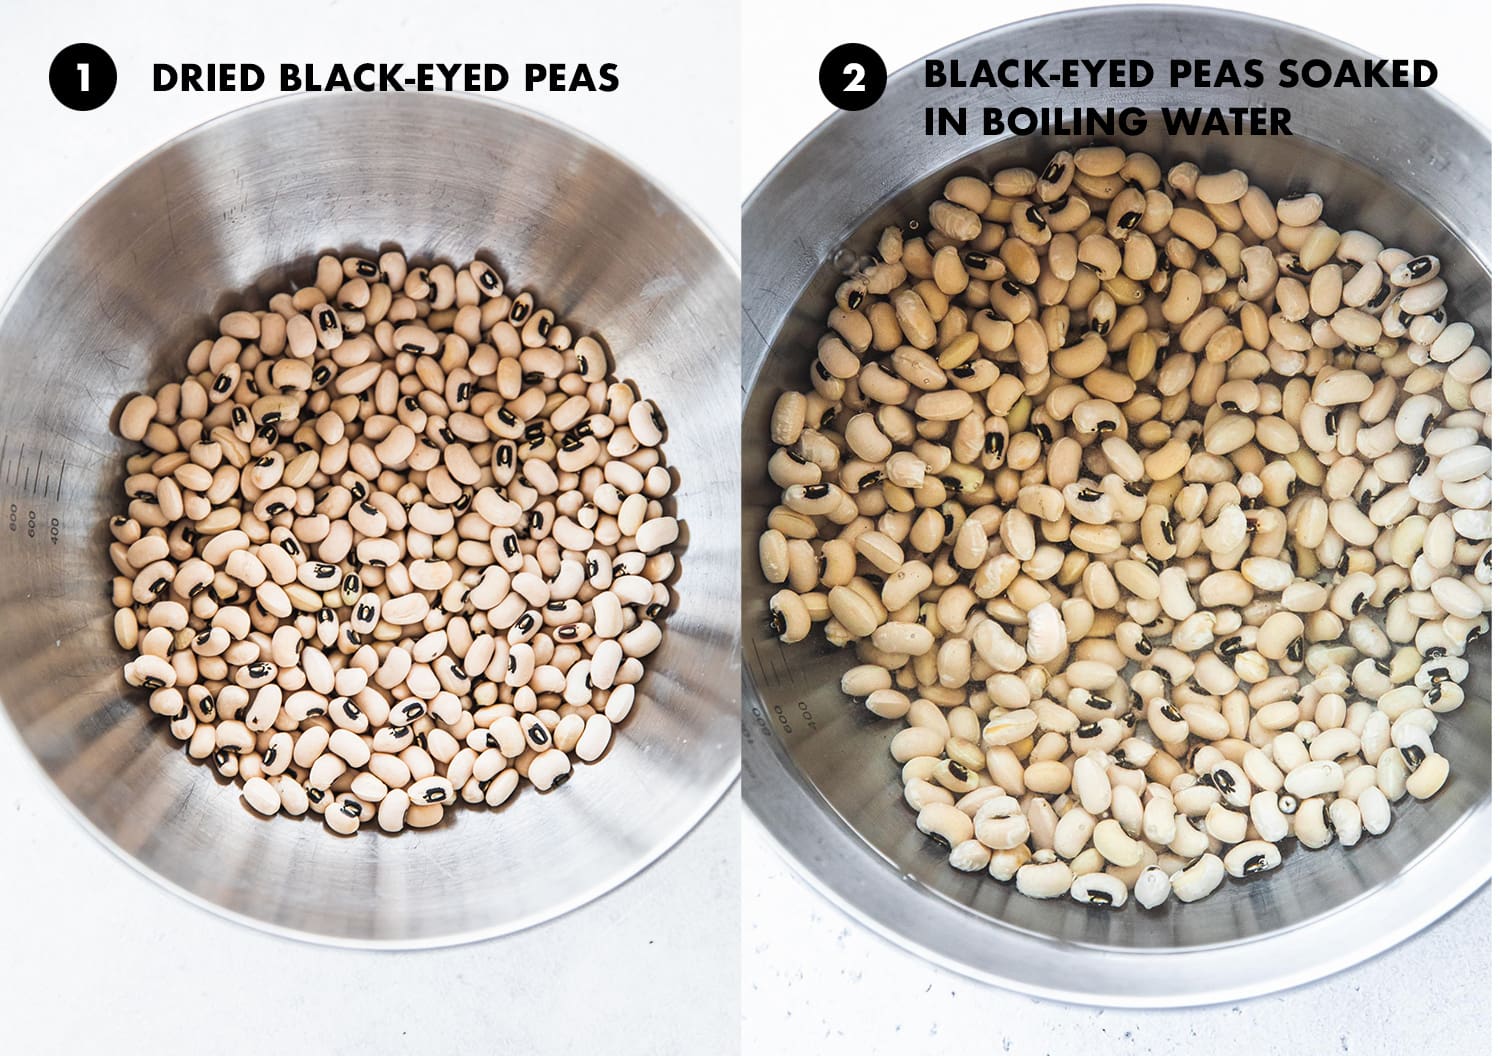 Soak dried black-eyed peas in boiling water in a bowl.